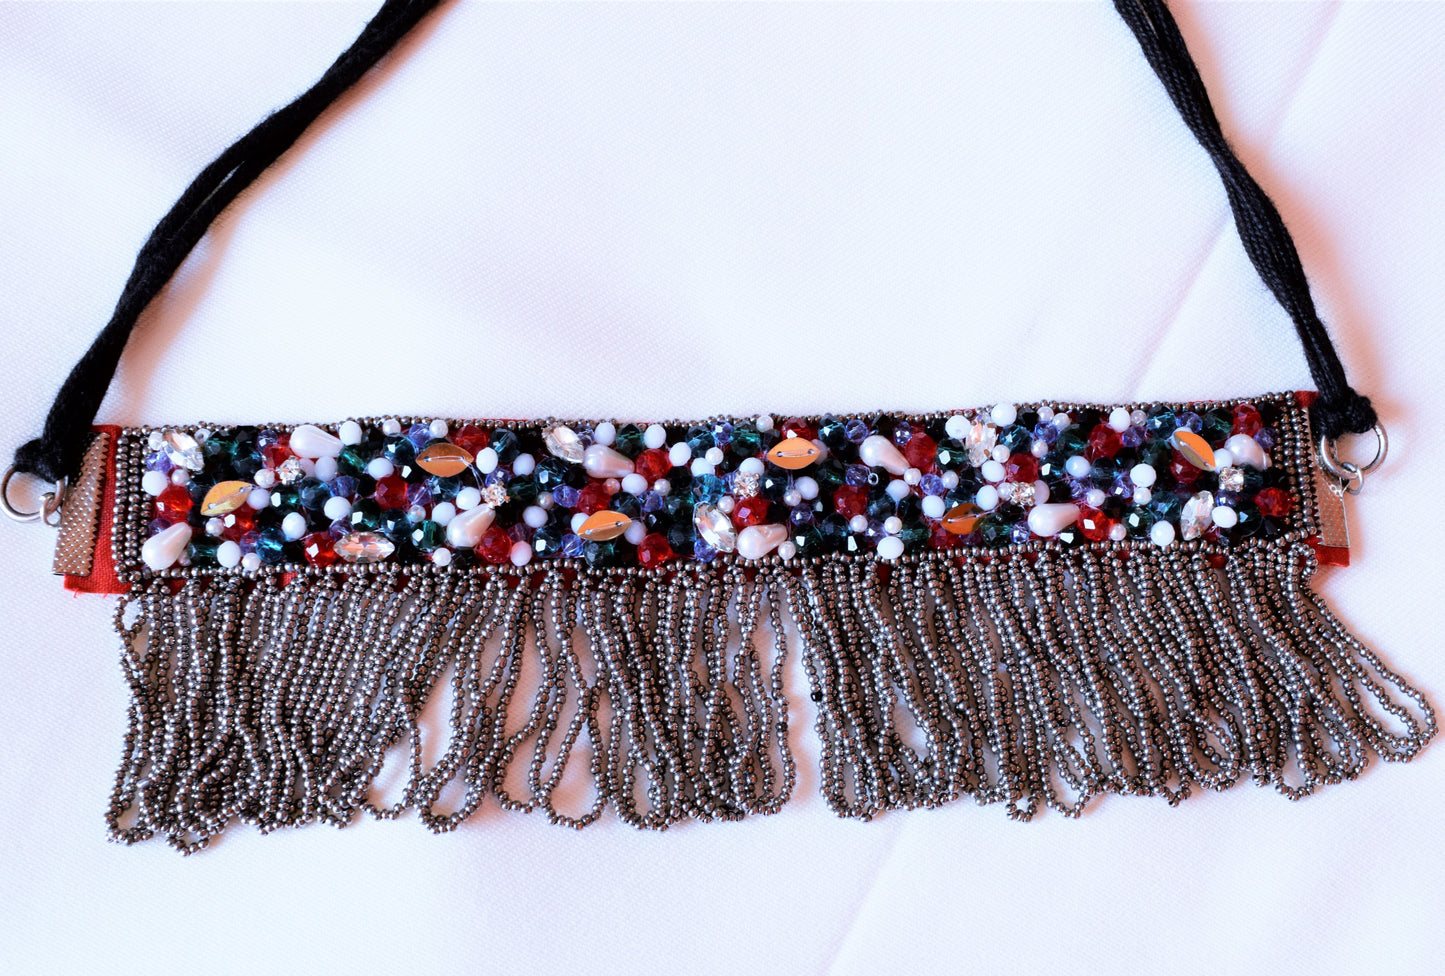 Handcrafted Bead and Crystal Maroon Fabric Choker Necklace with Earrings